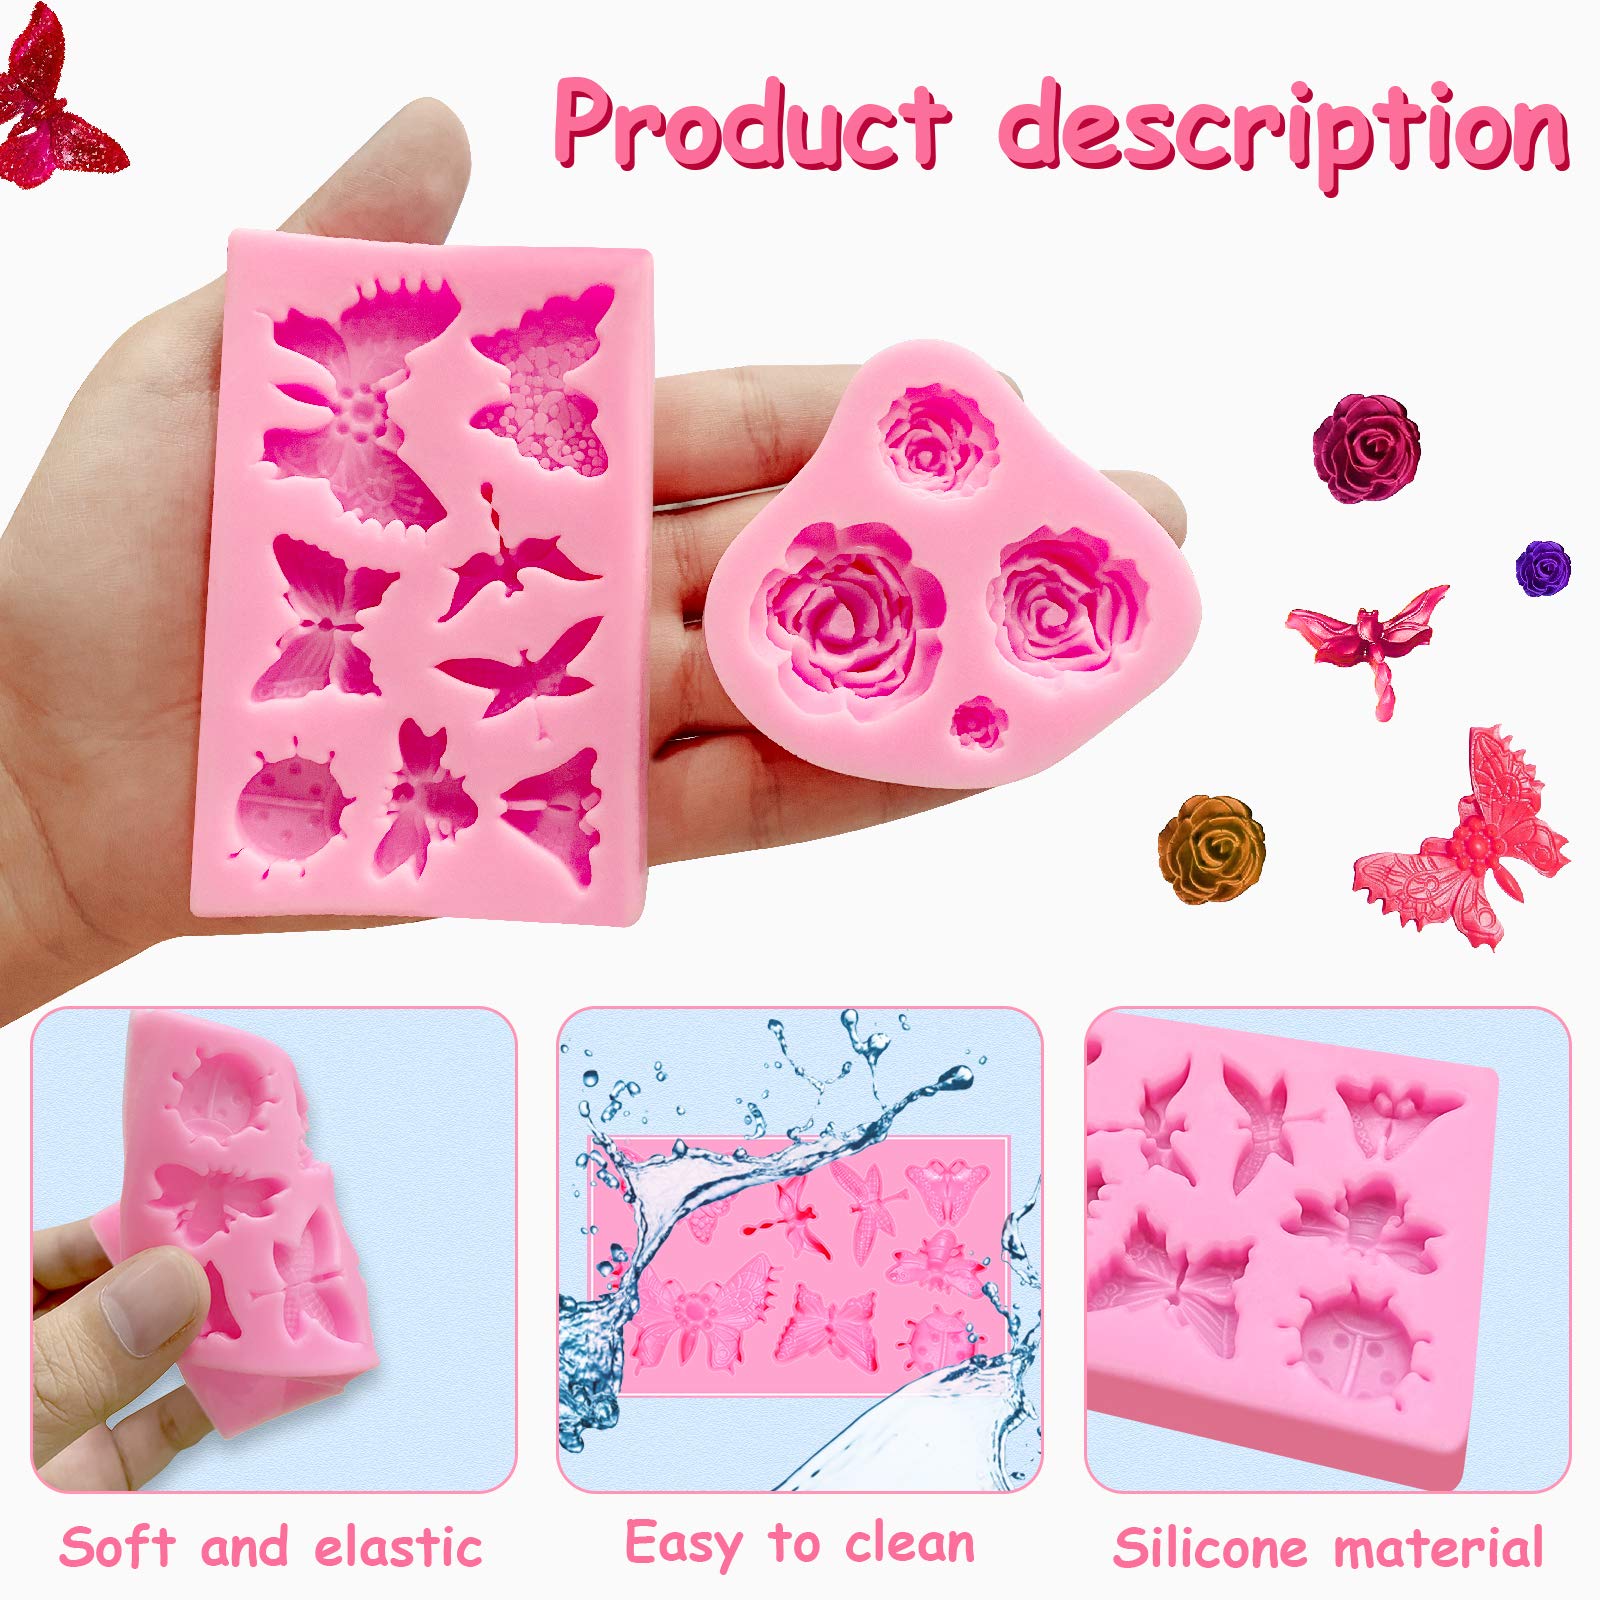 6 Pack Fondant Molds, Mini Flower Mold Butterfly Molds Leaf Mold, Rose Clay Molds Pink Polymer Clay Molds, Non-stick Silicone Molds for Cake Decorating - Butterfly/Rose/Leaves